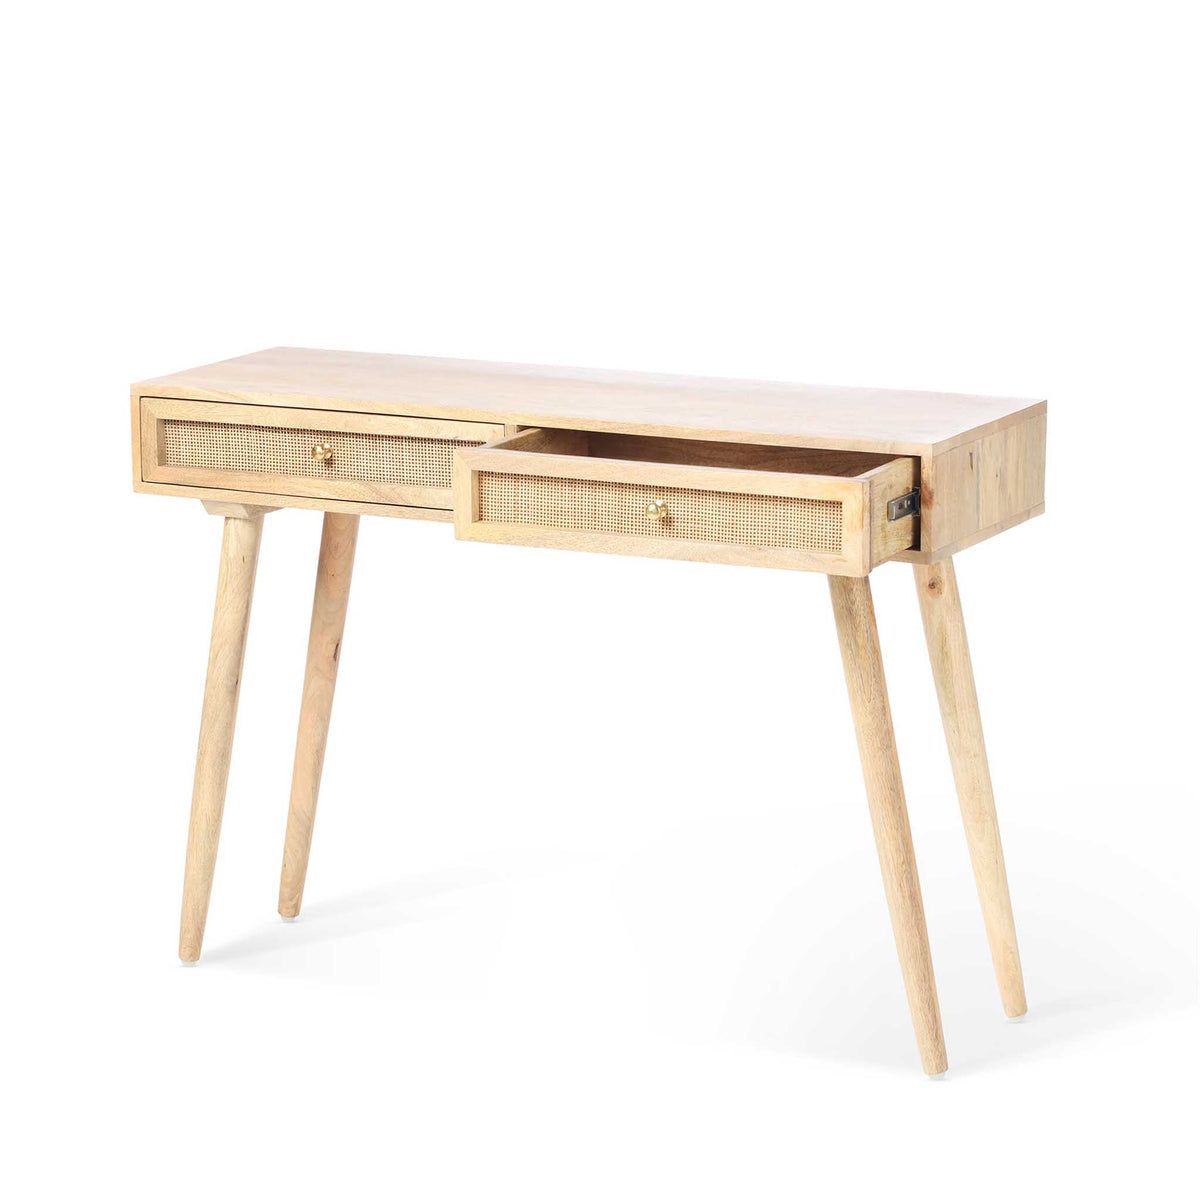 Venti Natural Mango Wood & Cane Console Table with Drawers